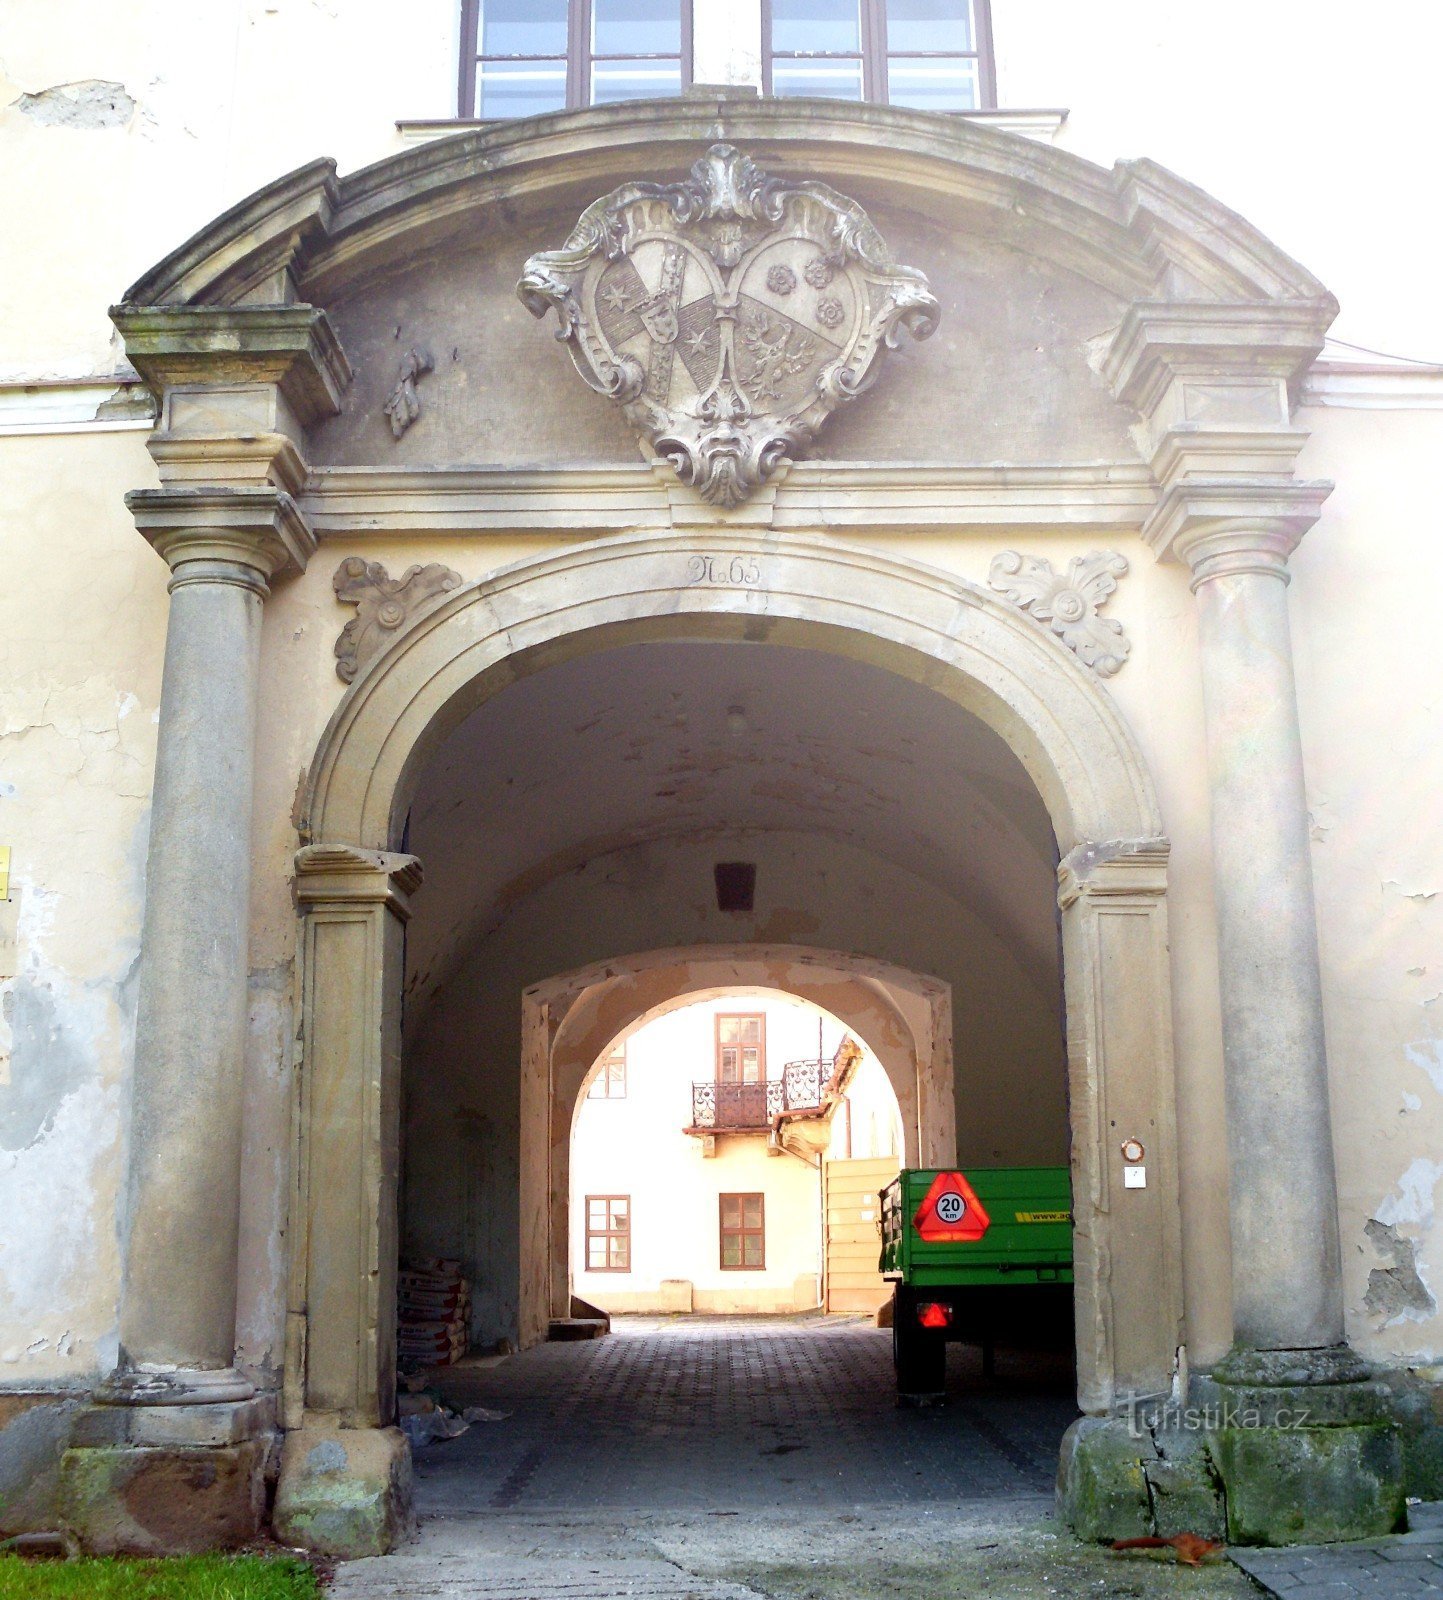 the main entrance to the castle